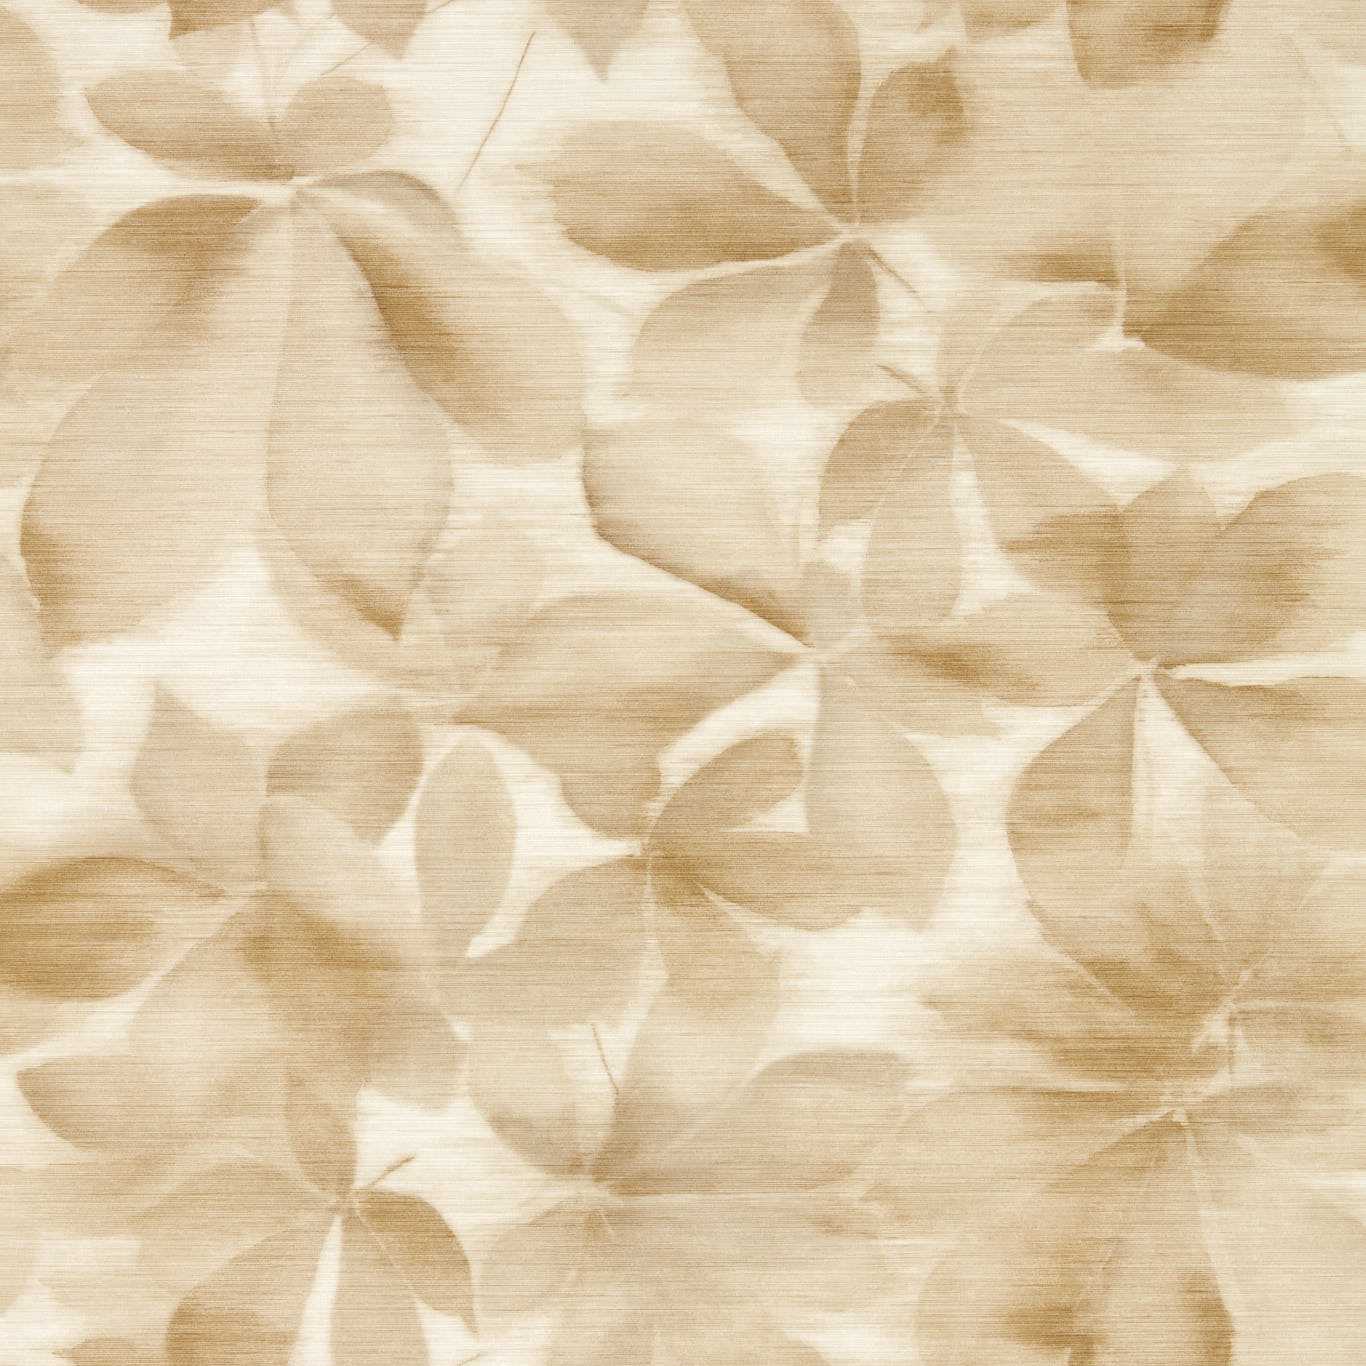 Grounded Golden Light/Parchment Wallpaper HC4W113004 by Harlequin